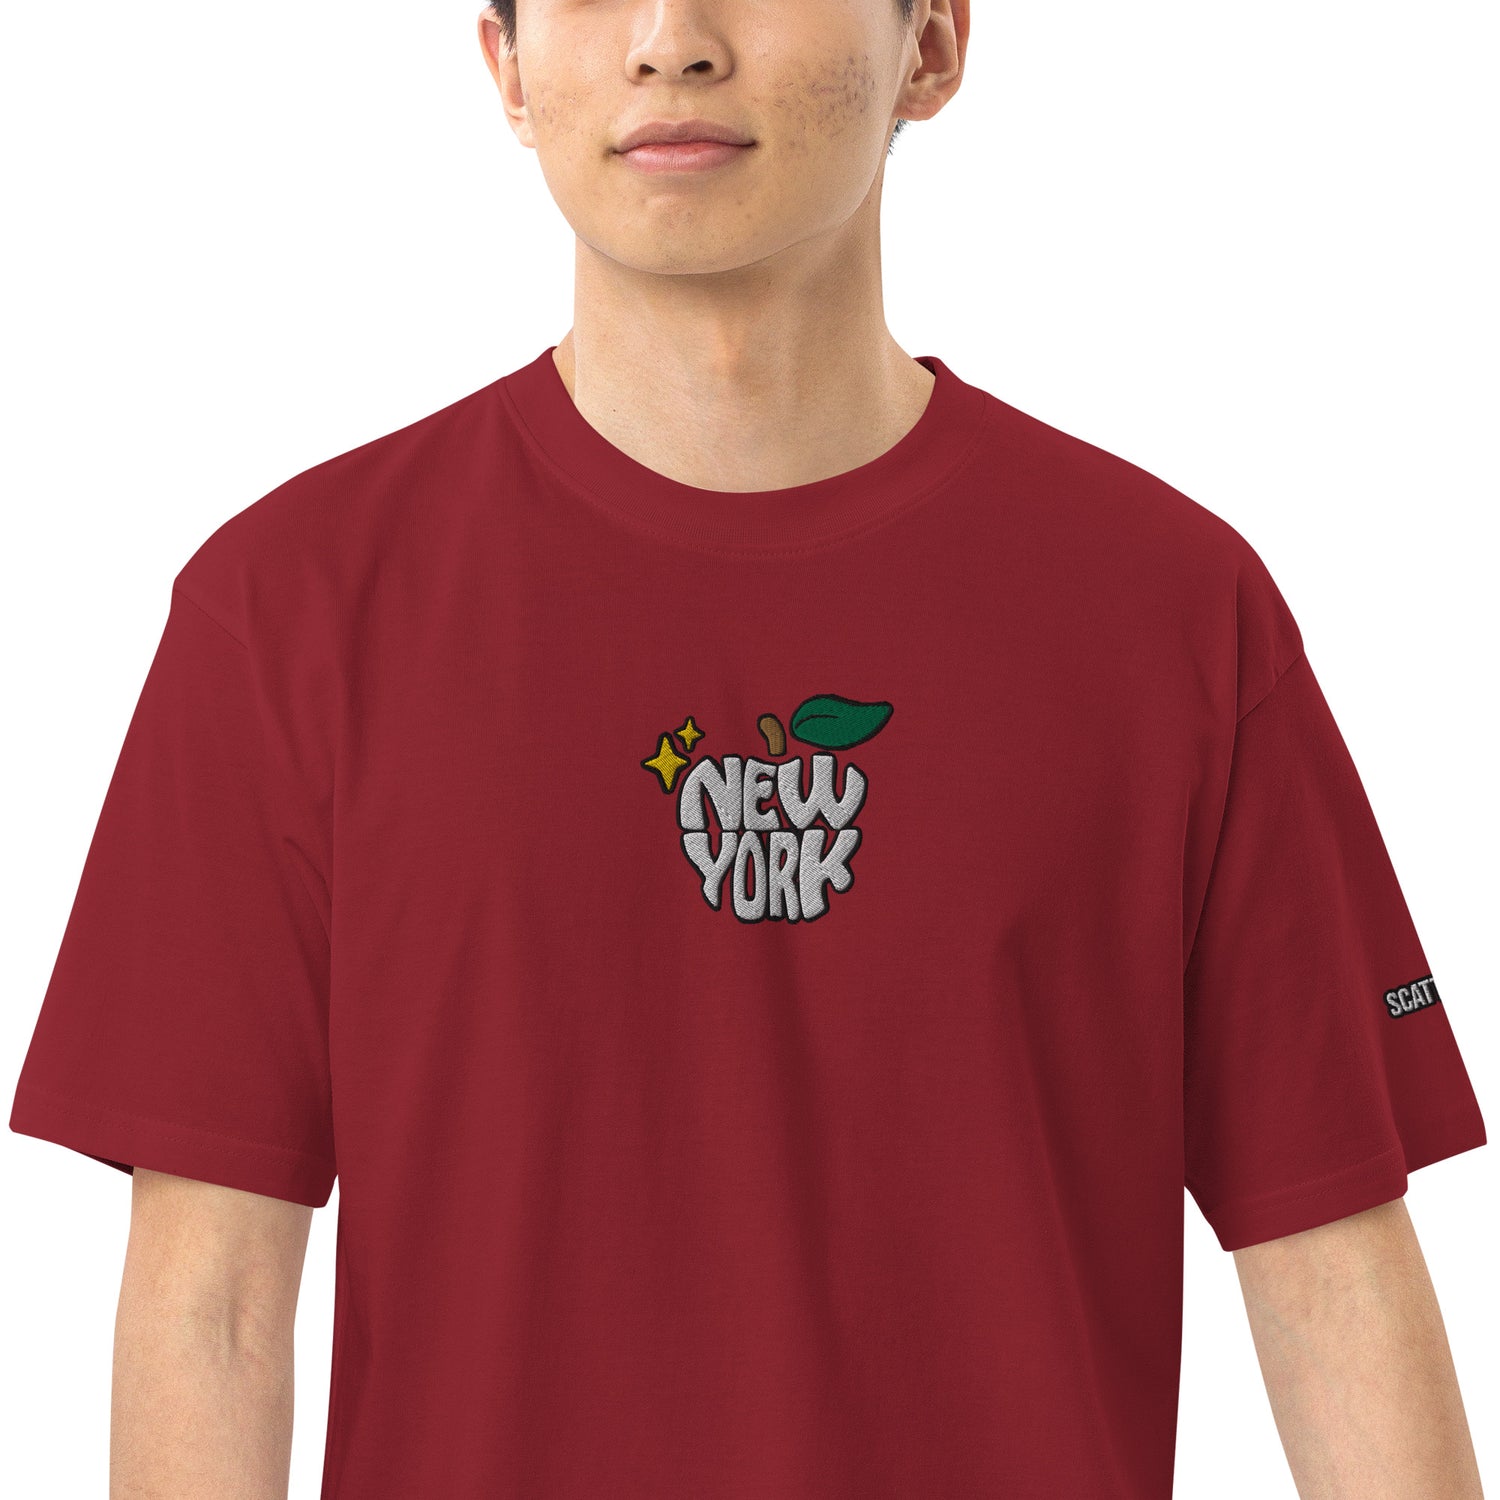 New York Apple Logo Embroidered Red T-Shirt Scattered Streetwear